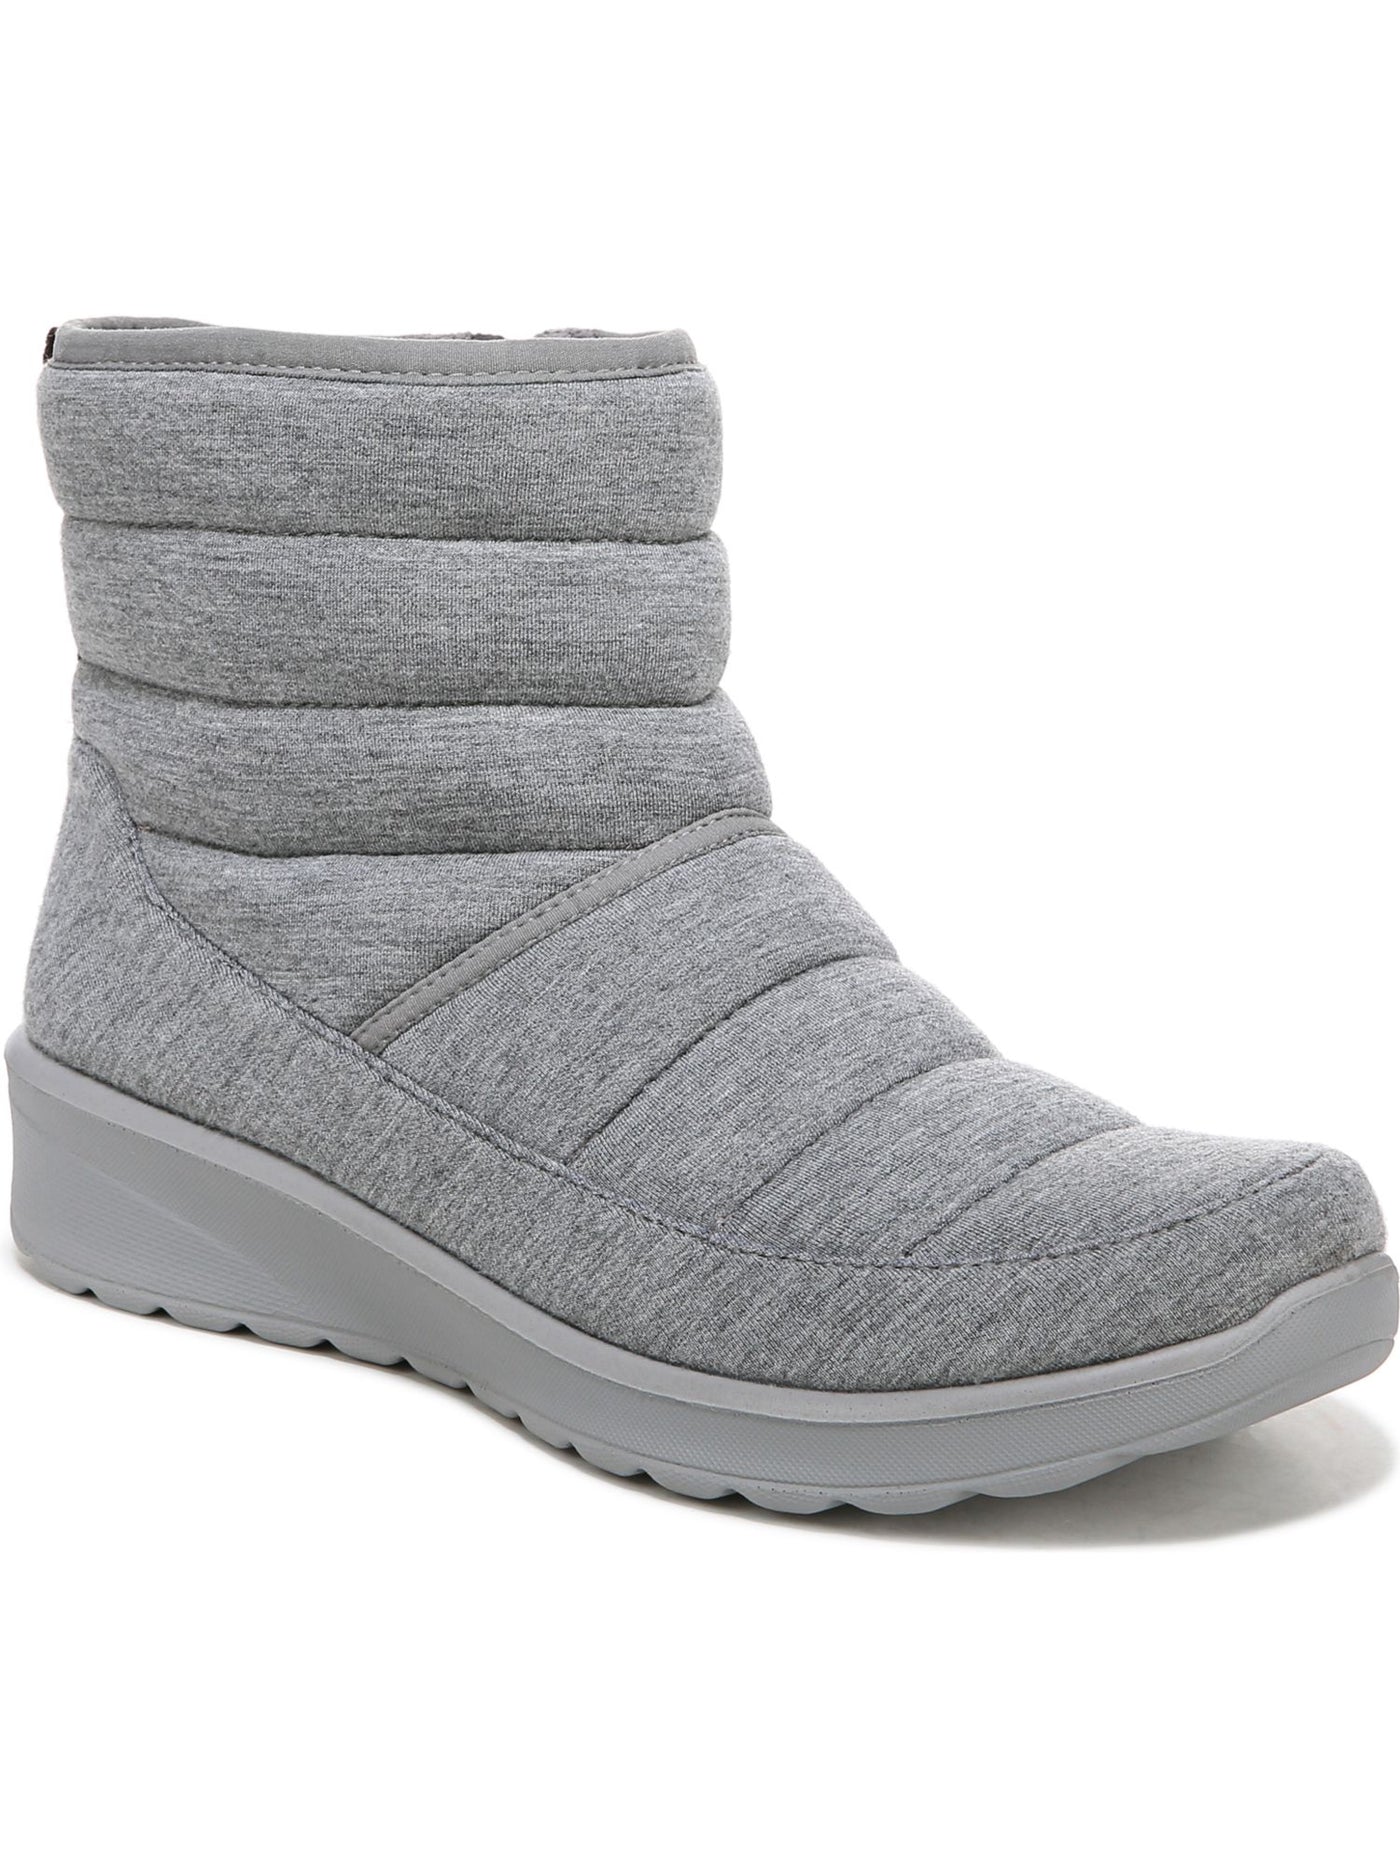 BZEES Womens Gray Cushioned Stretch Glacier Round Toe Wedge Zip-Up Booties 6.5 M